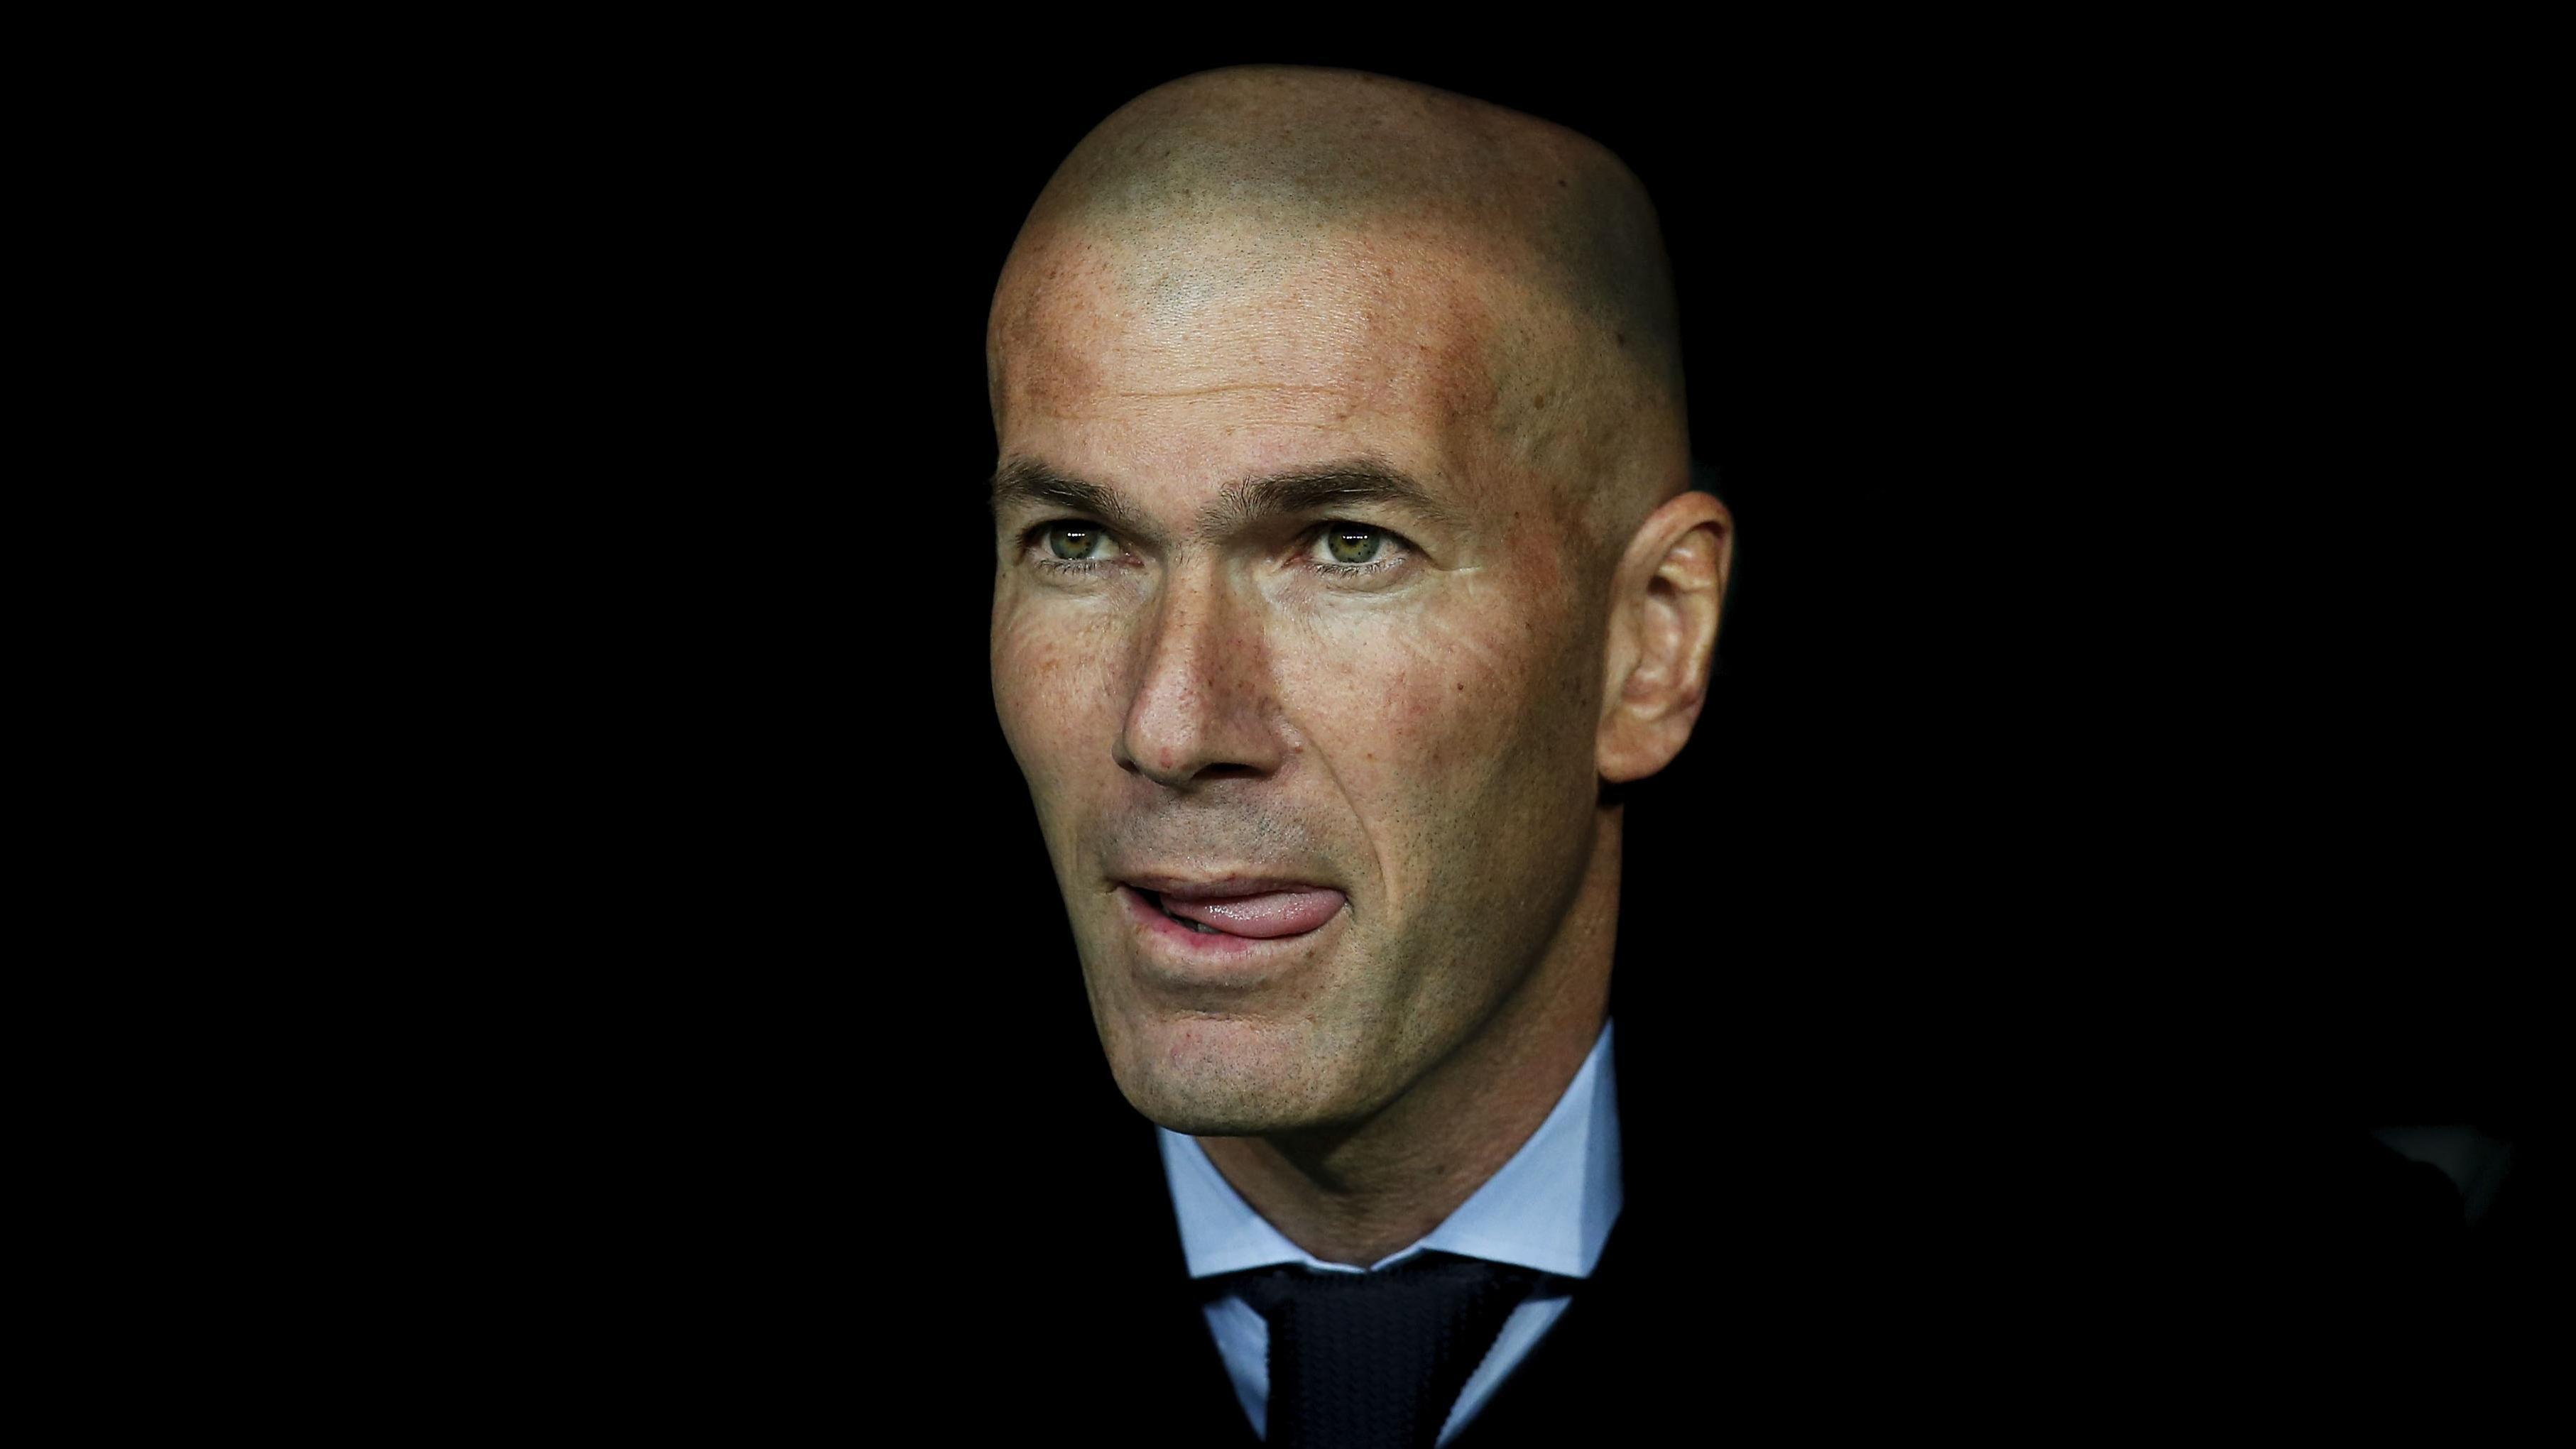 Watch: Zinedine Zidane loses his cool at Real Madrid press conference